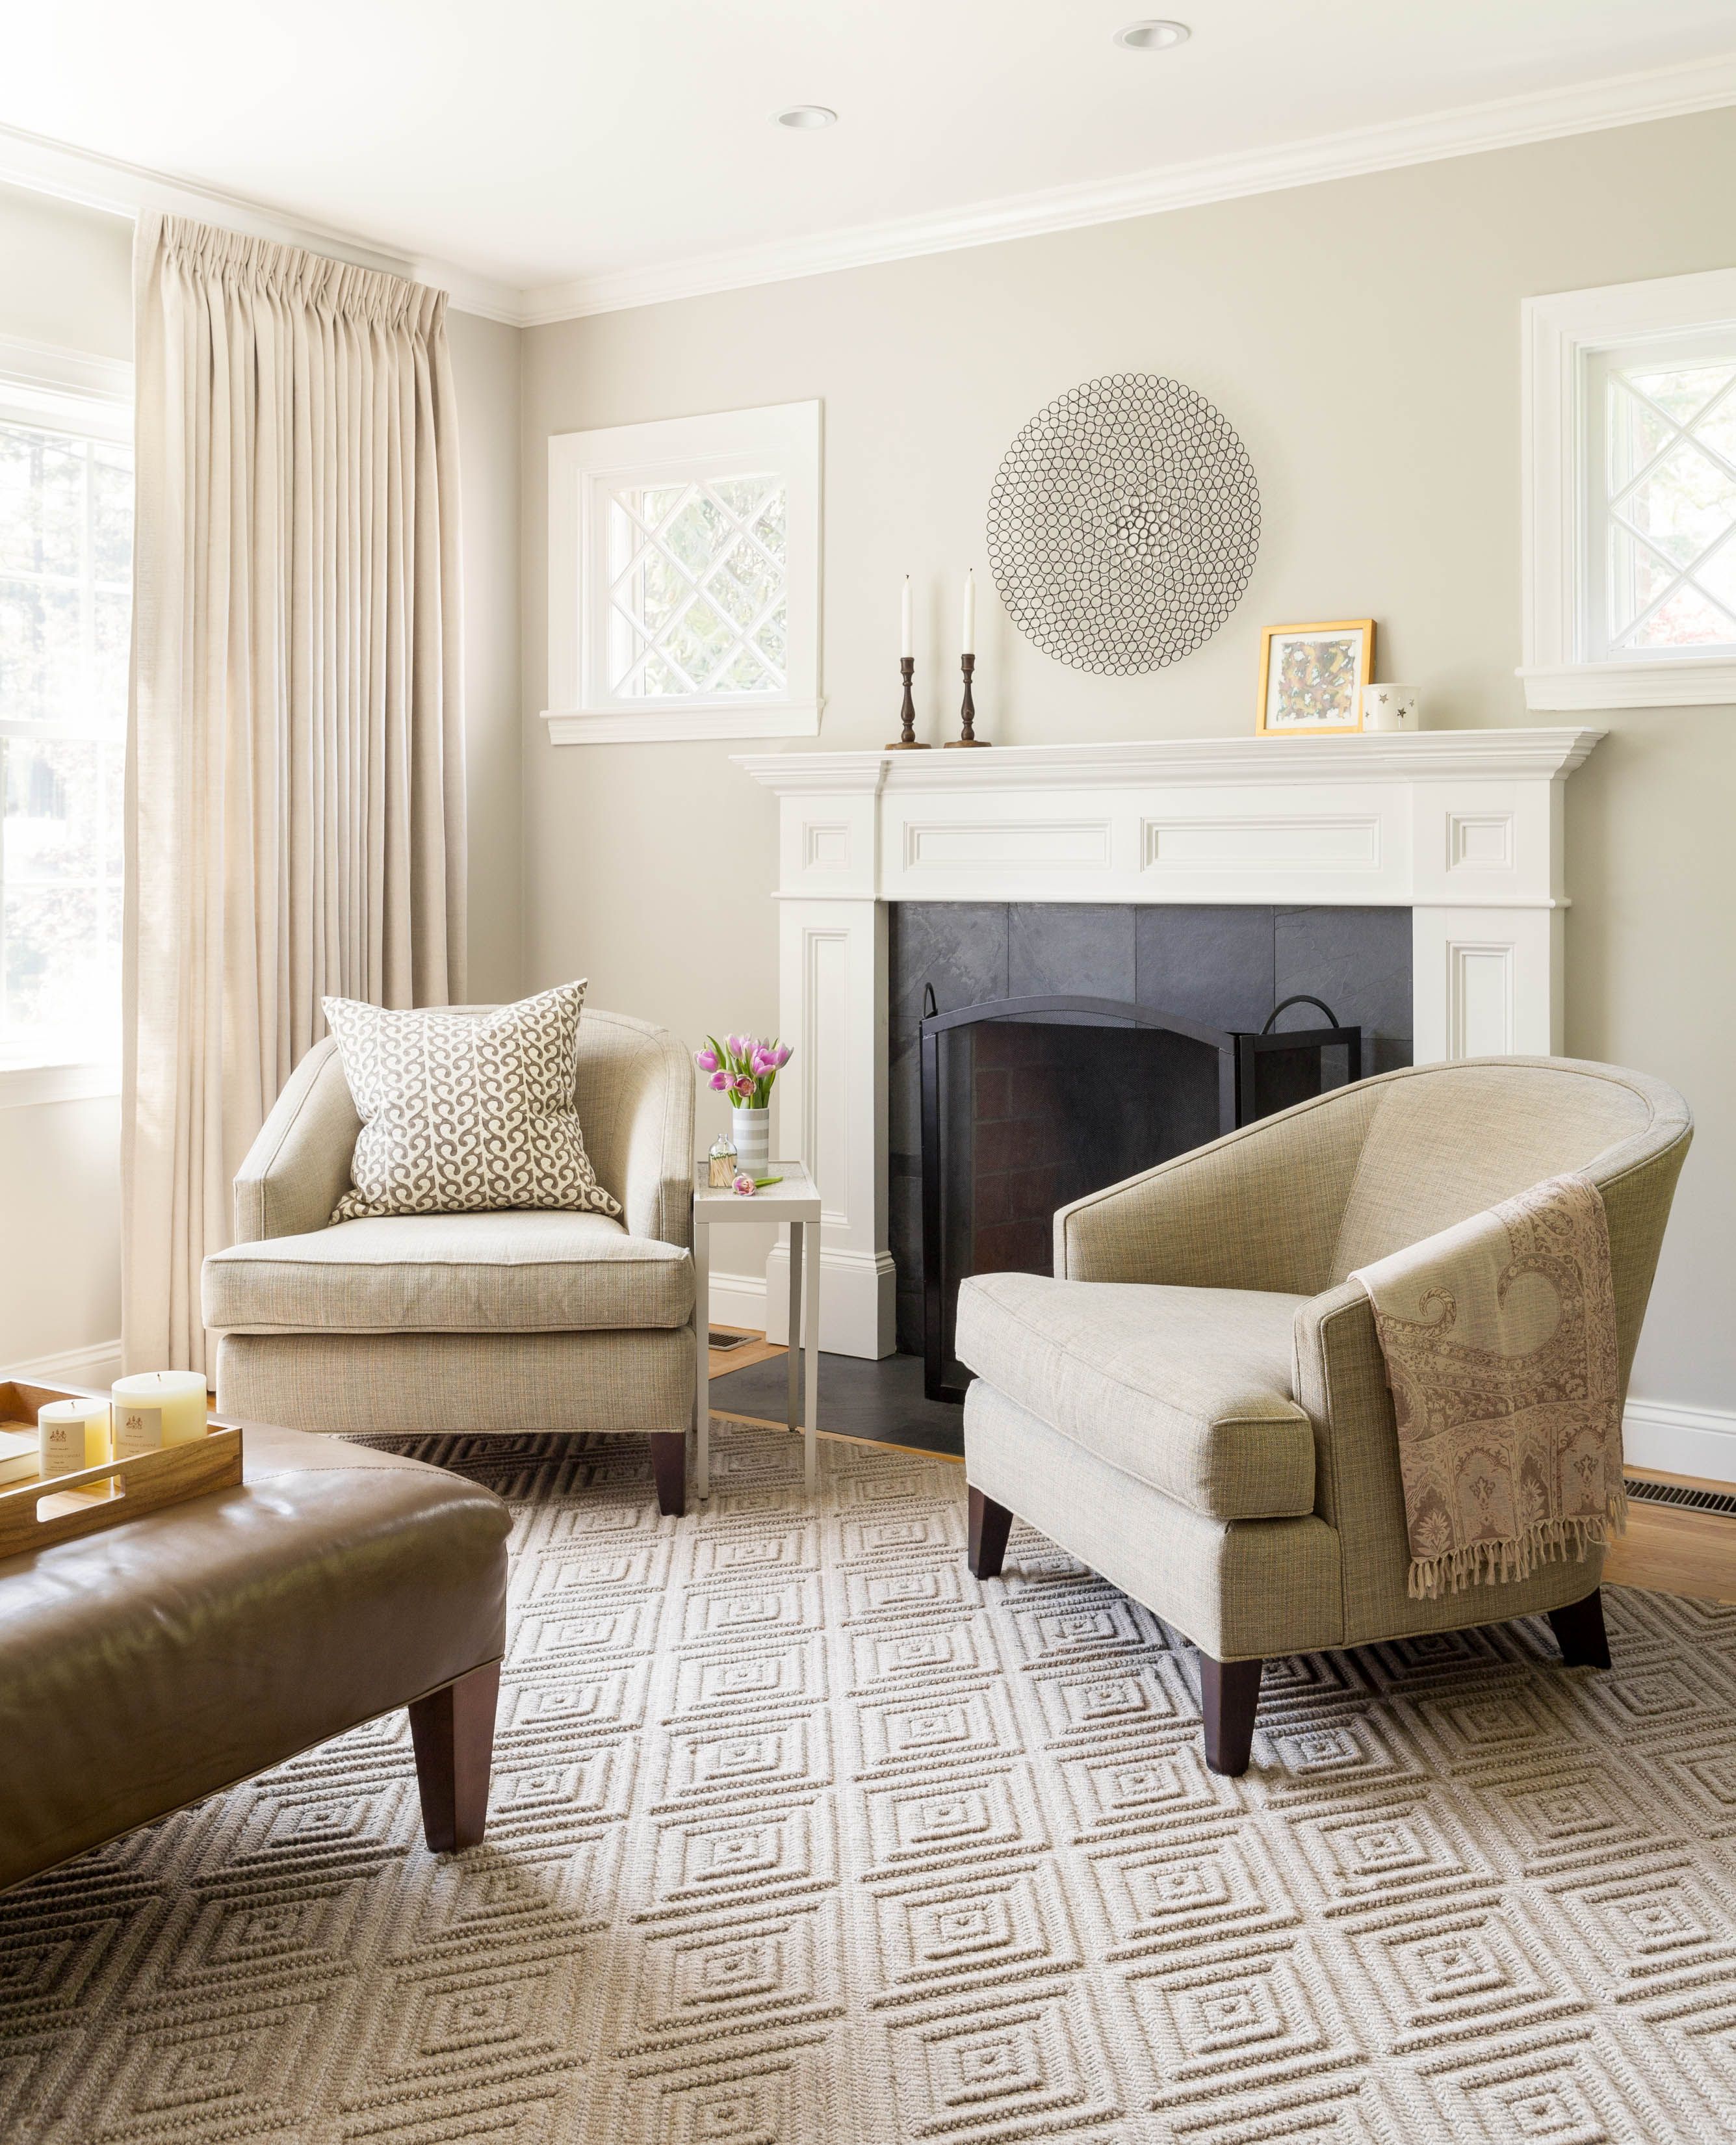 How To Decorate With Neutral Colors